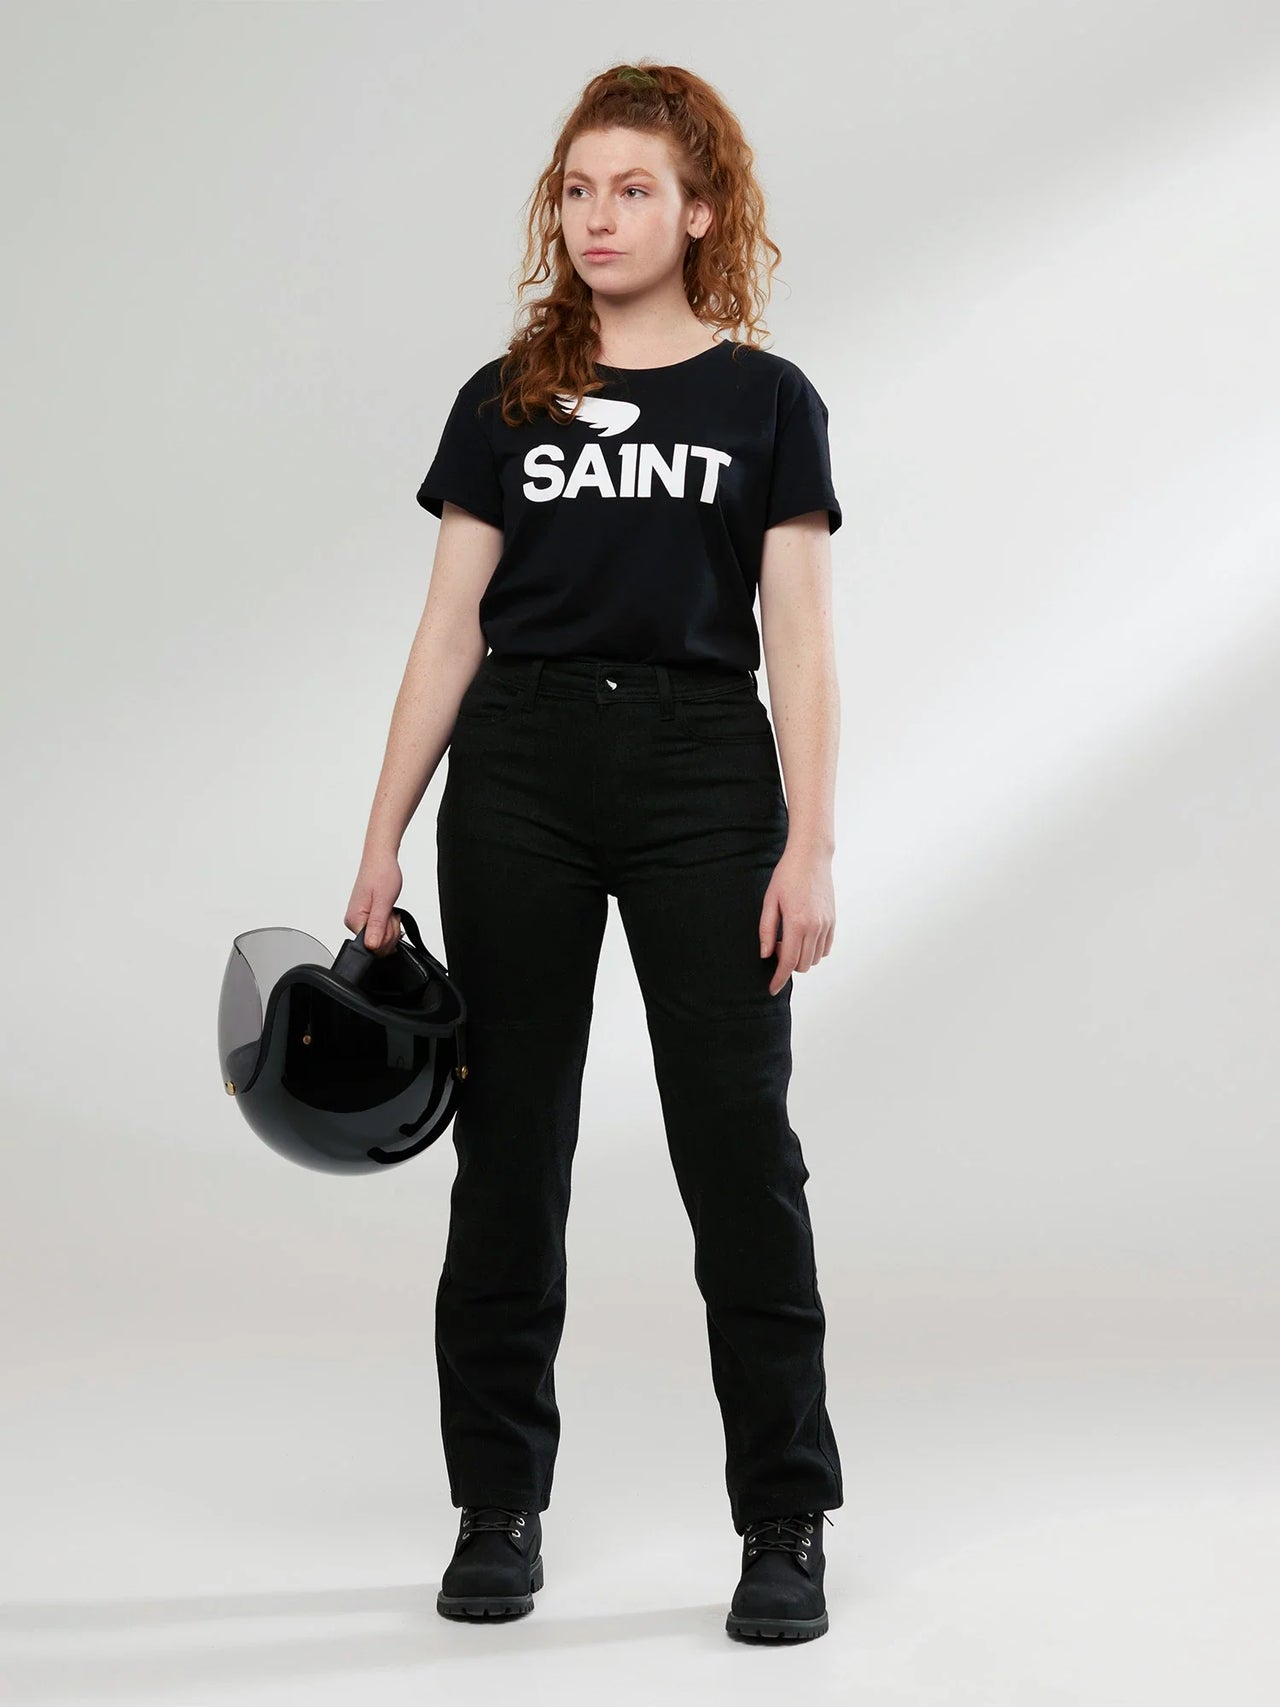 Women's Engineered Straight Fit Armoured Jean - SA1NT